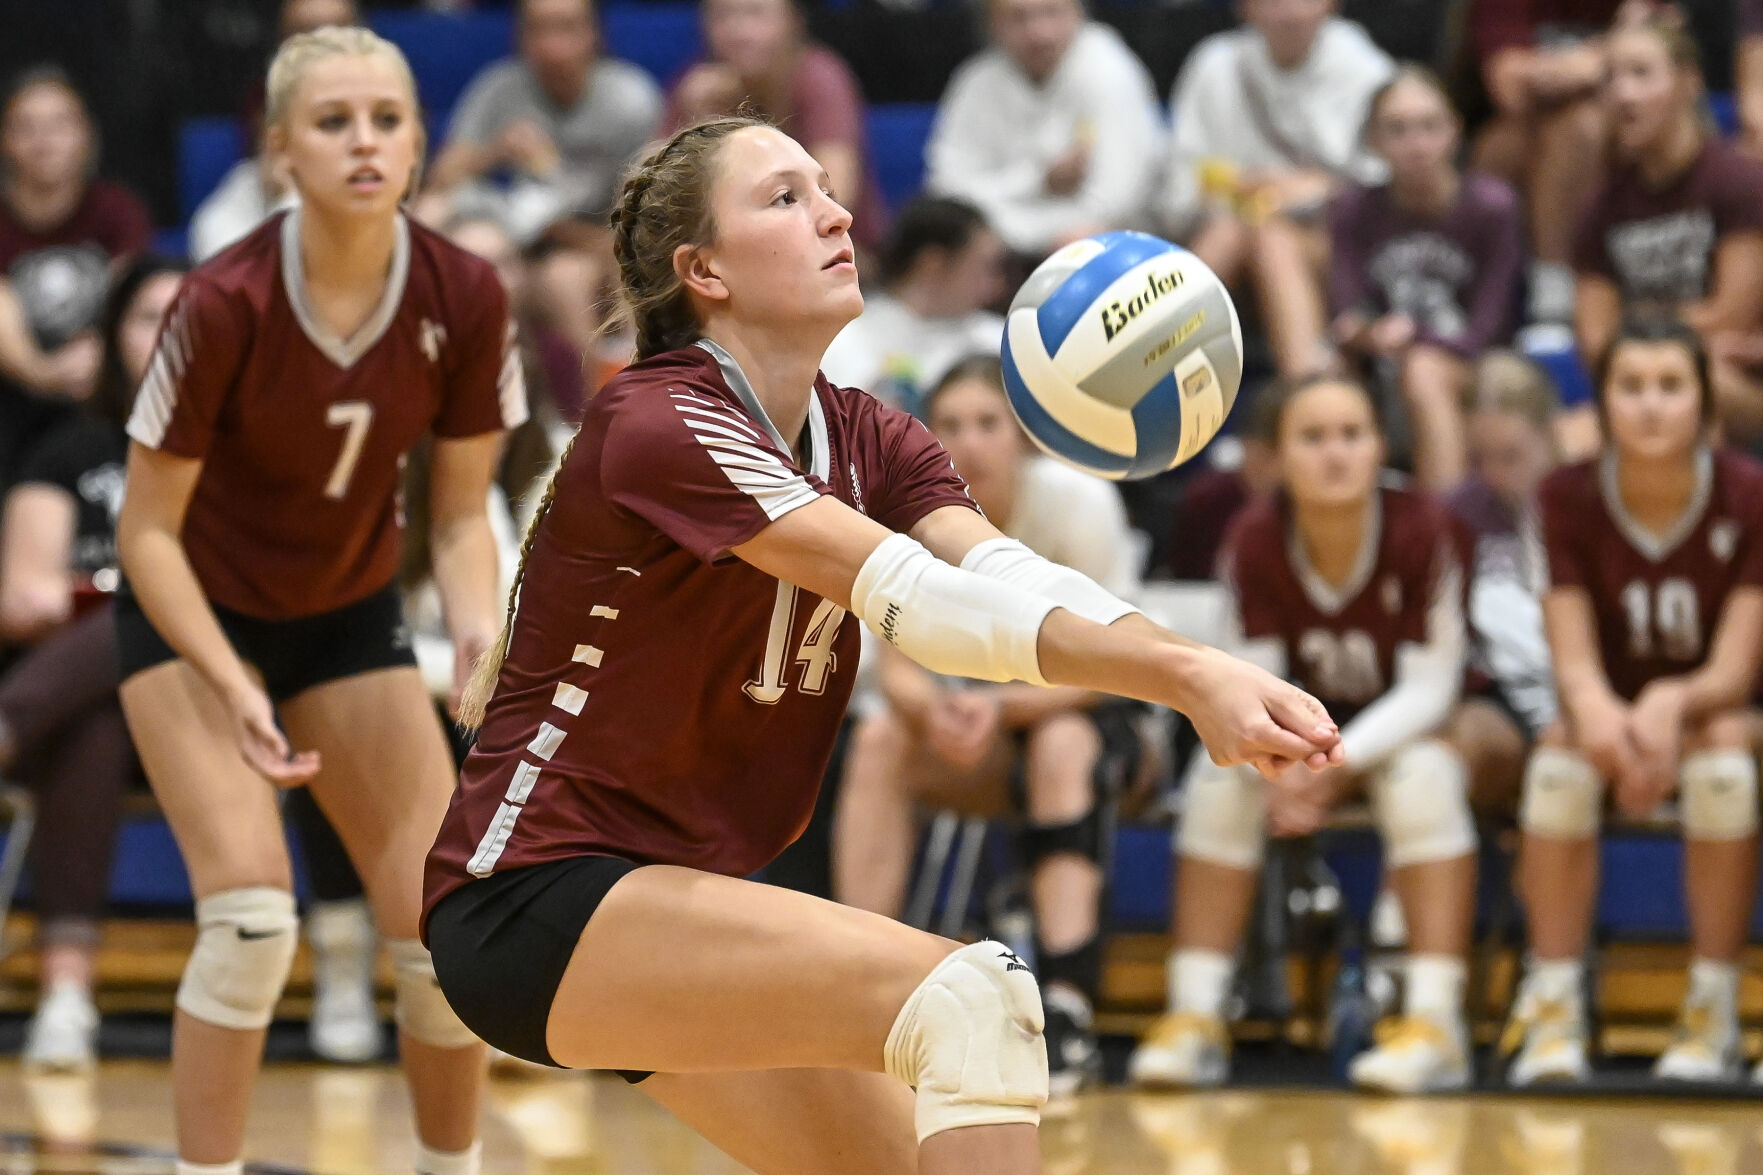 Spearfish Volleyball Team Sweeps St. Thomas More for Victory